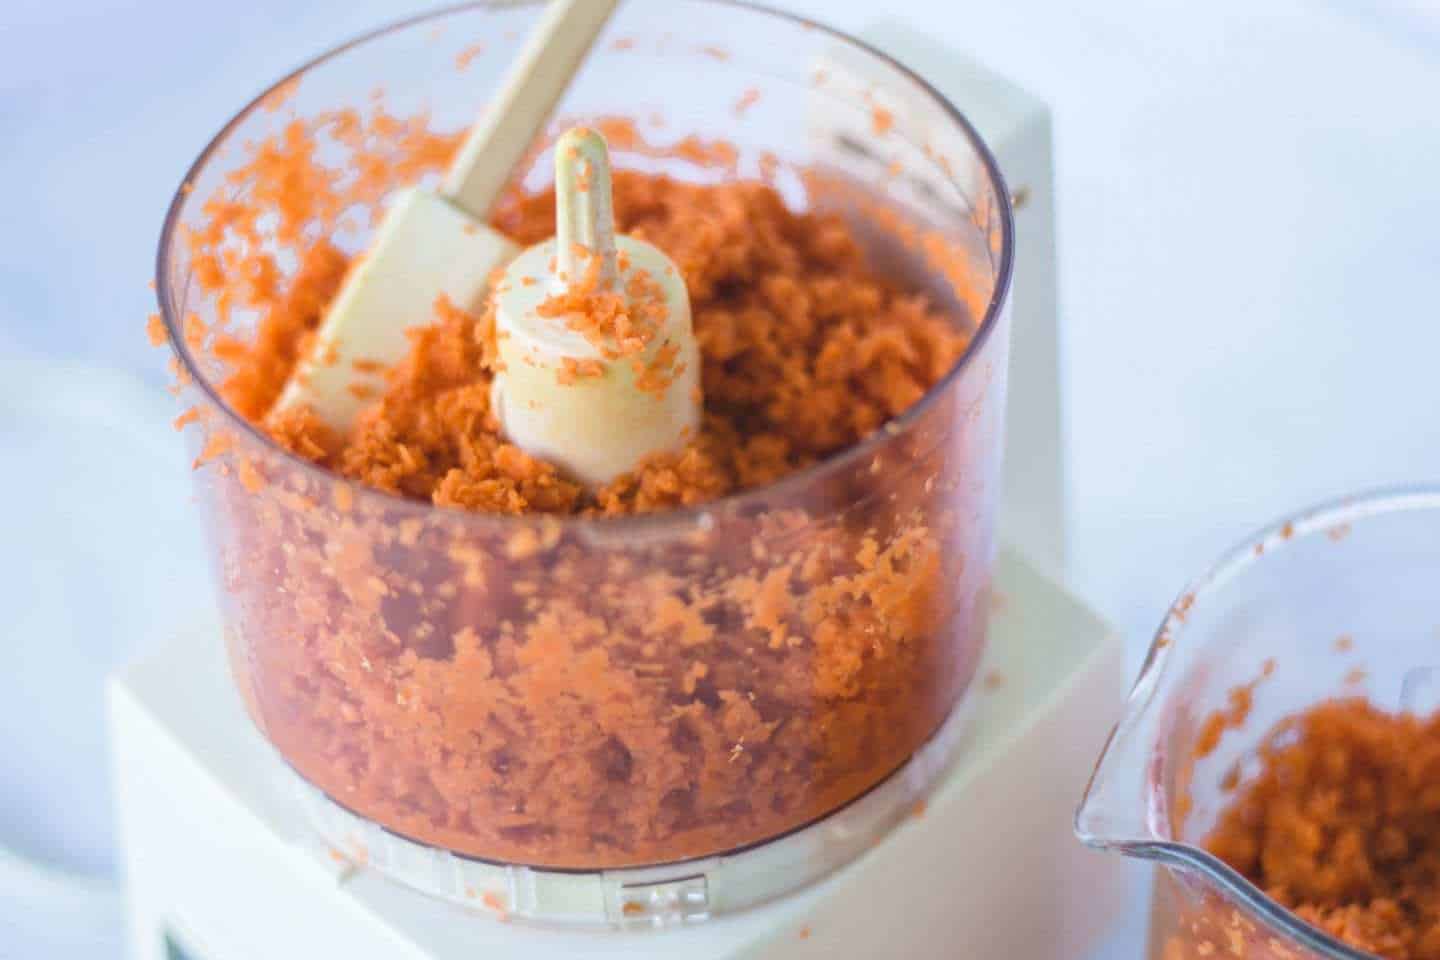 How To Grate Carrots In Cuisinart Food Processor